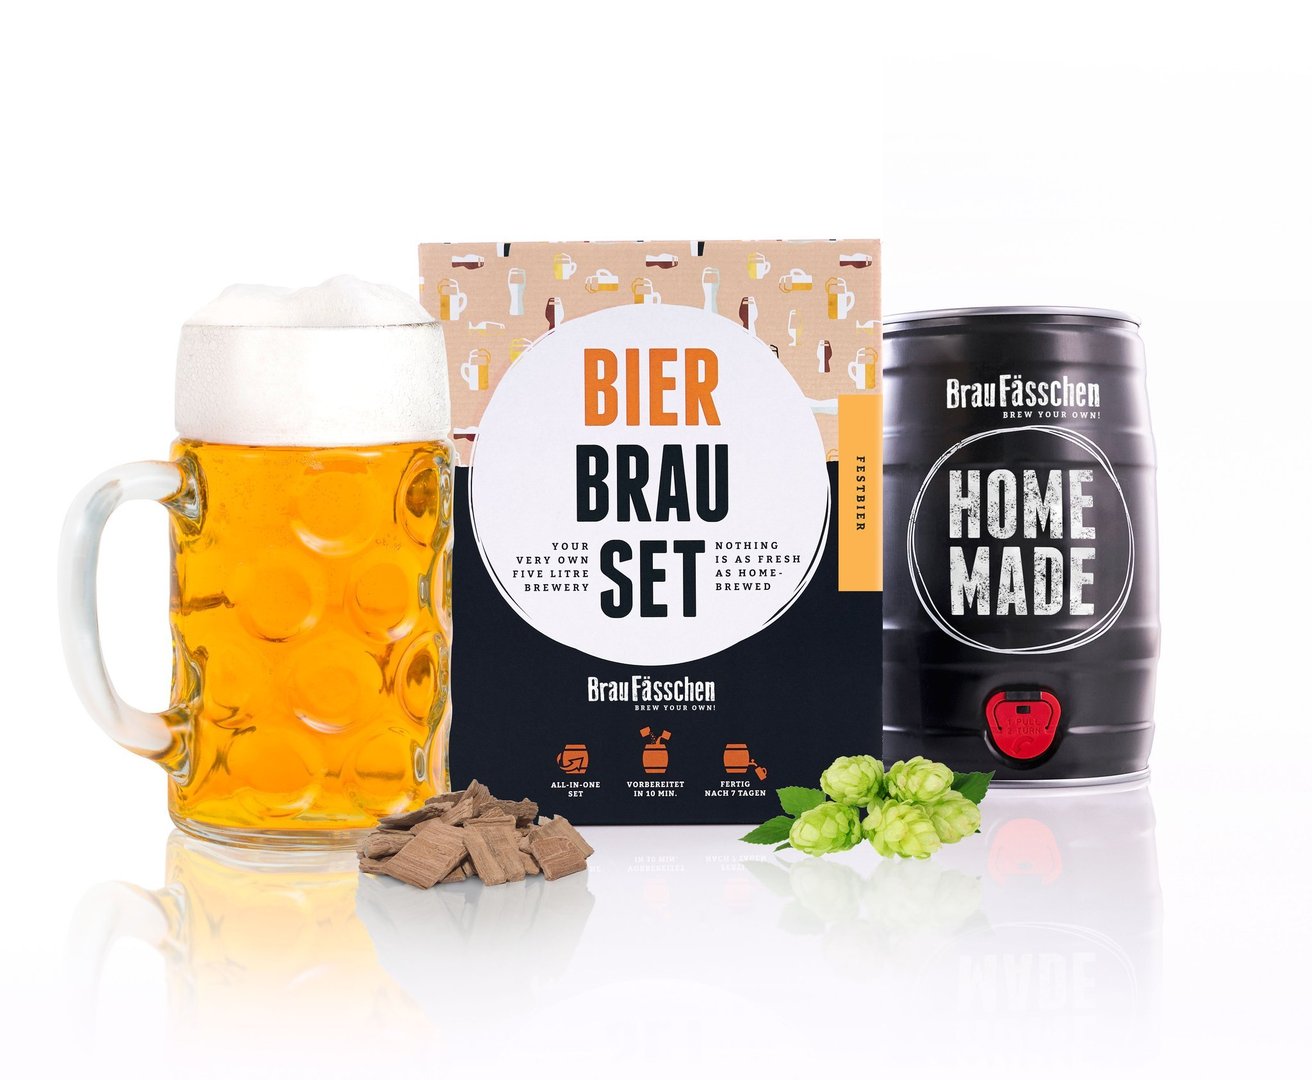 Beer brewing set - FESTBIER - to brew yourself